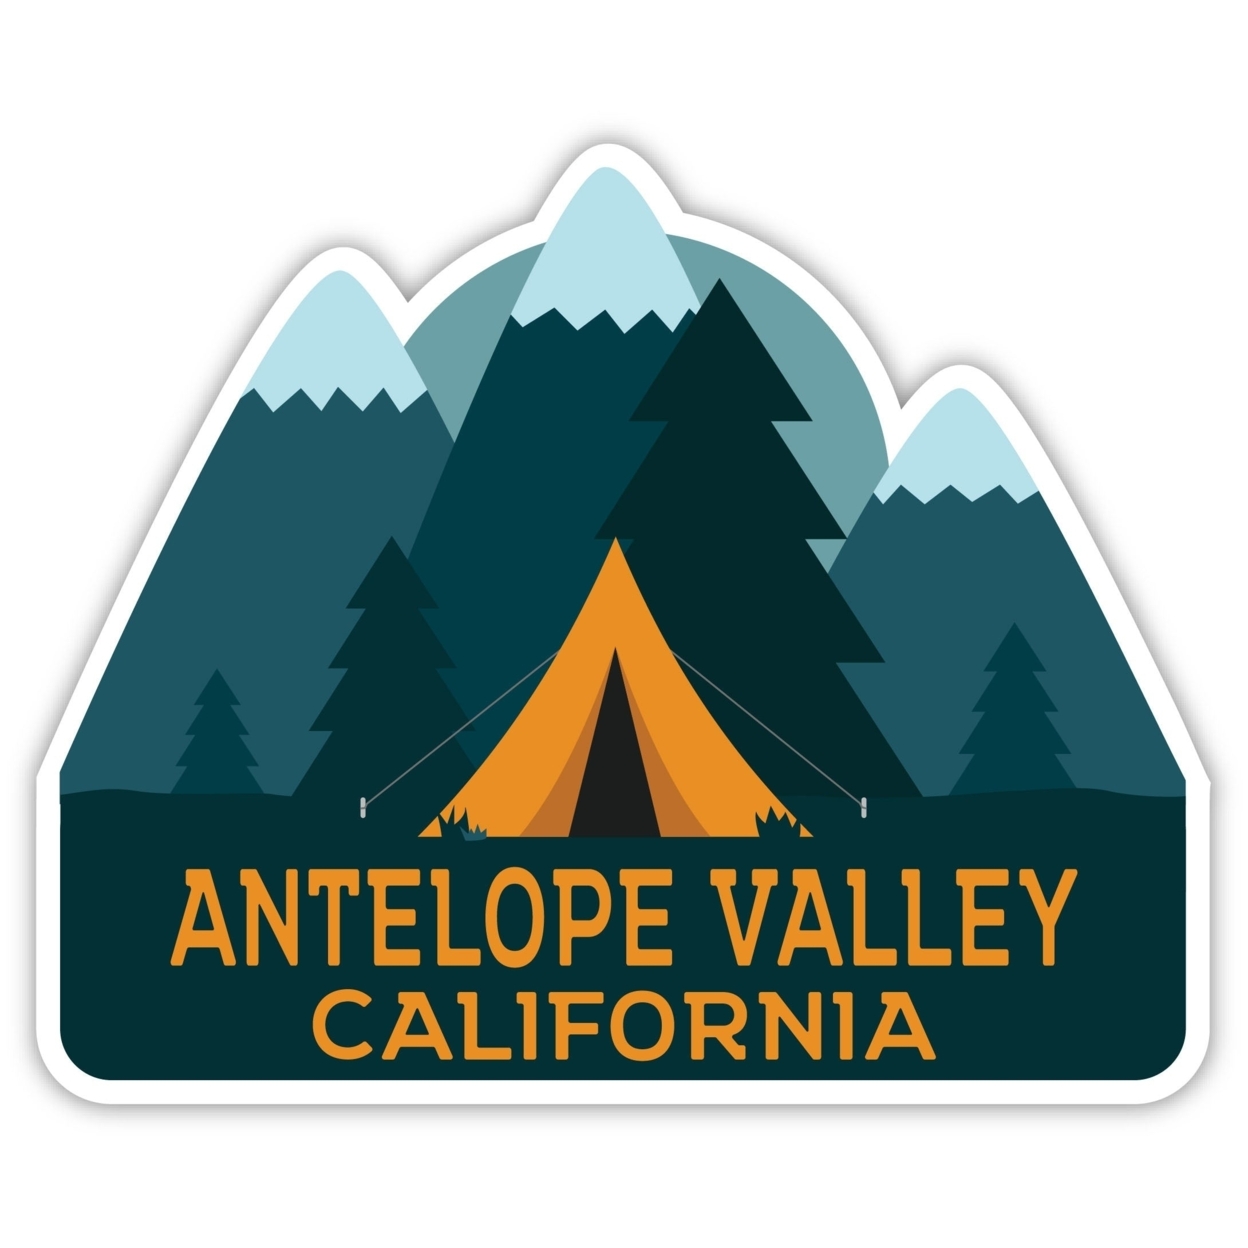 Antelope Valley California Souvenir Decorative Stickers (Choose Theme And Size) - Single Unit, 4-Inch, Bear